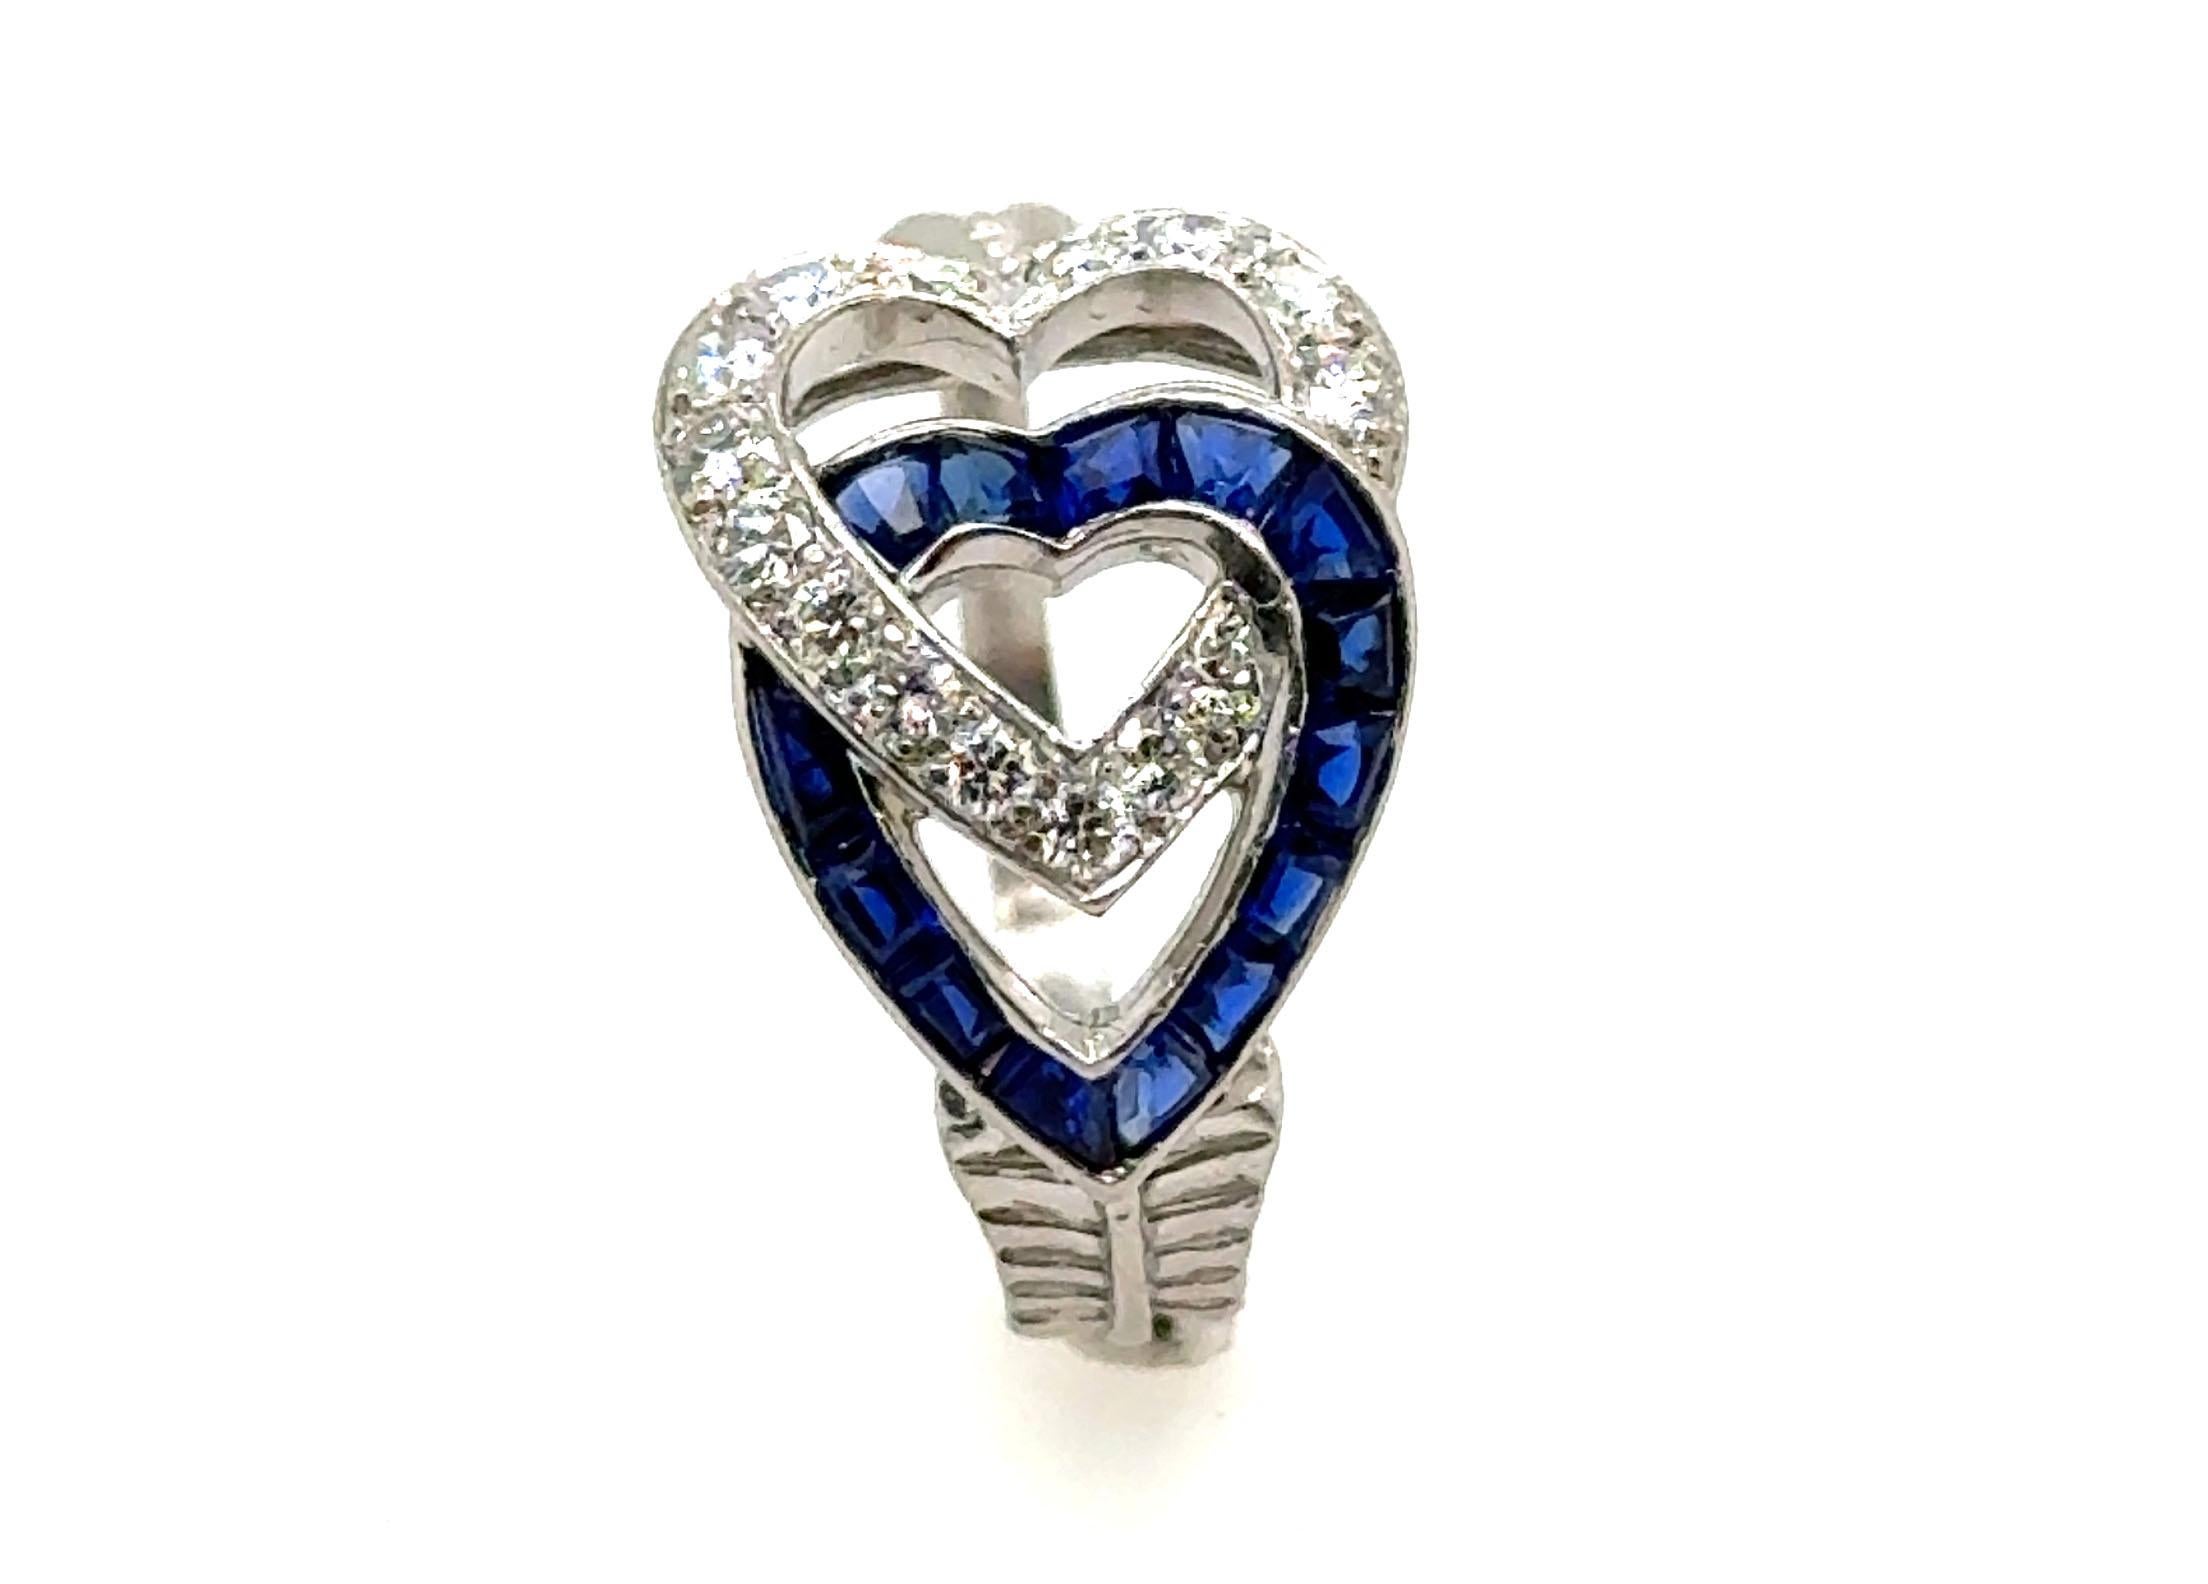 Genuine Original Art Deco Antique from 1930's Hearts and Arrow Sapphire Diamond Ring Platinum 


This Exquisite Ring Showcases a Captivating Royal Blue Sapphire Heart Elegantly Entwined with a Diamond Heart, Pierced by a Meticulously Hand Crafted